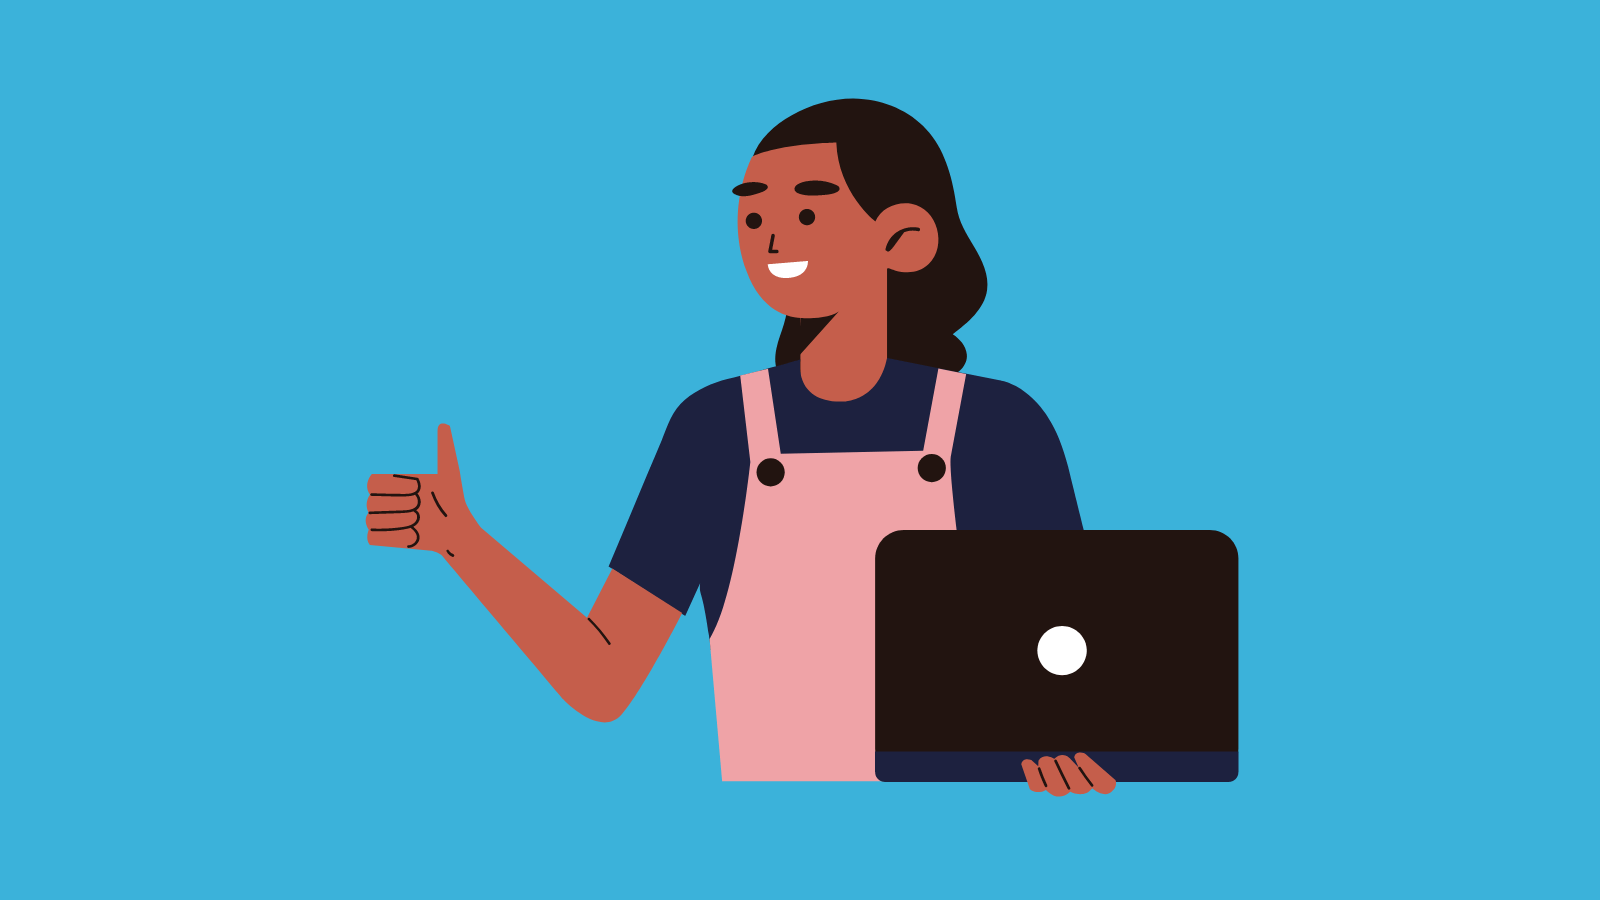 A young woman holding a laptop and flashing a thumbs up